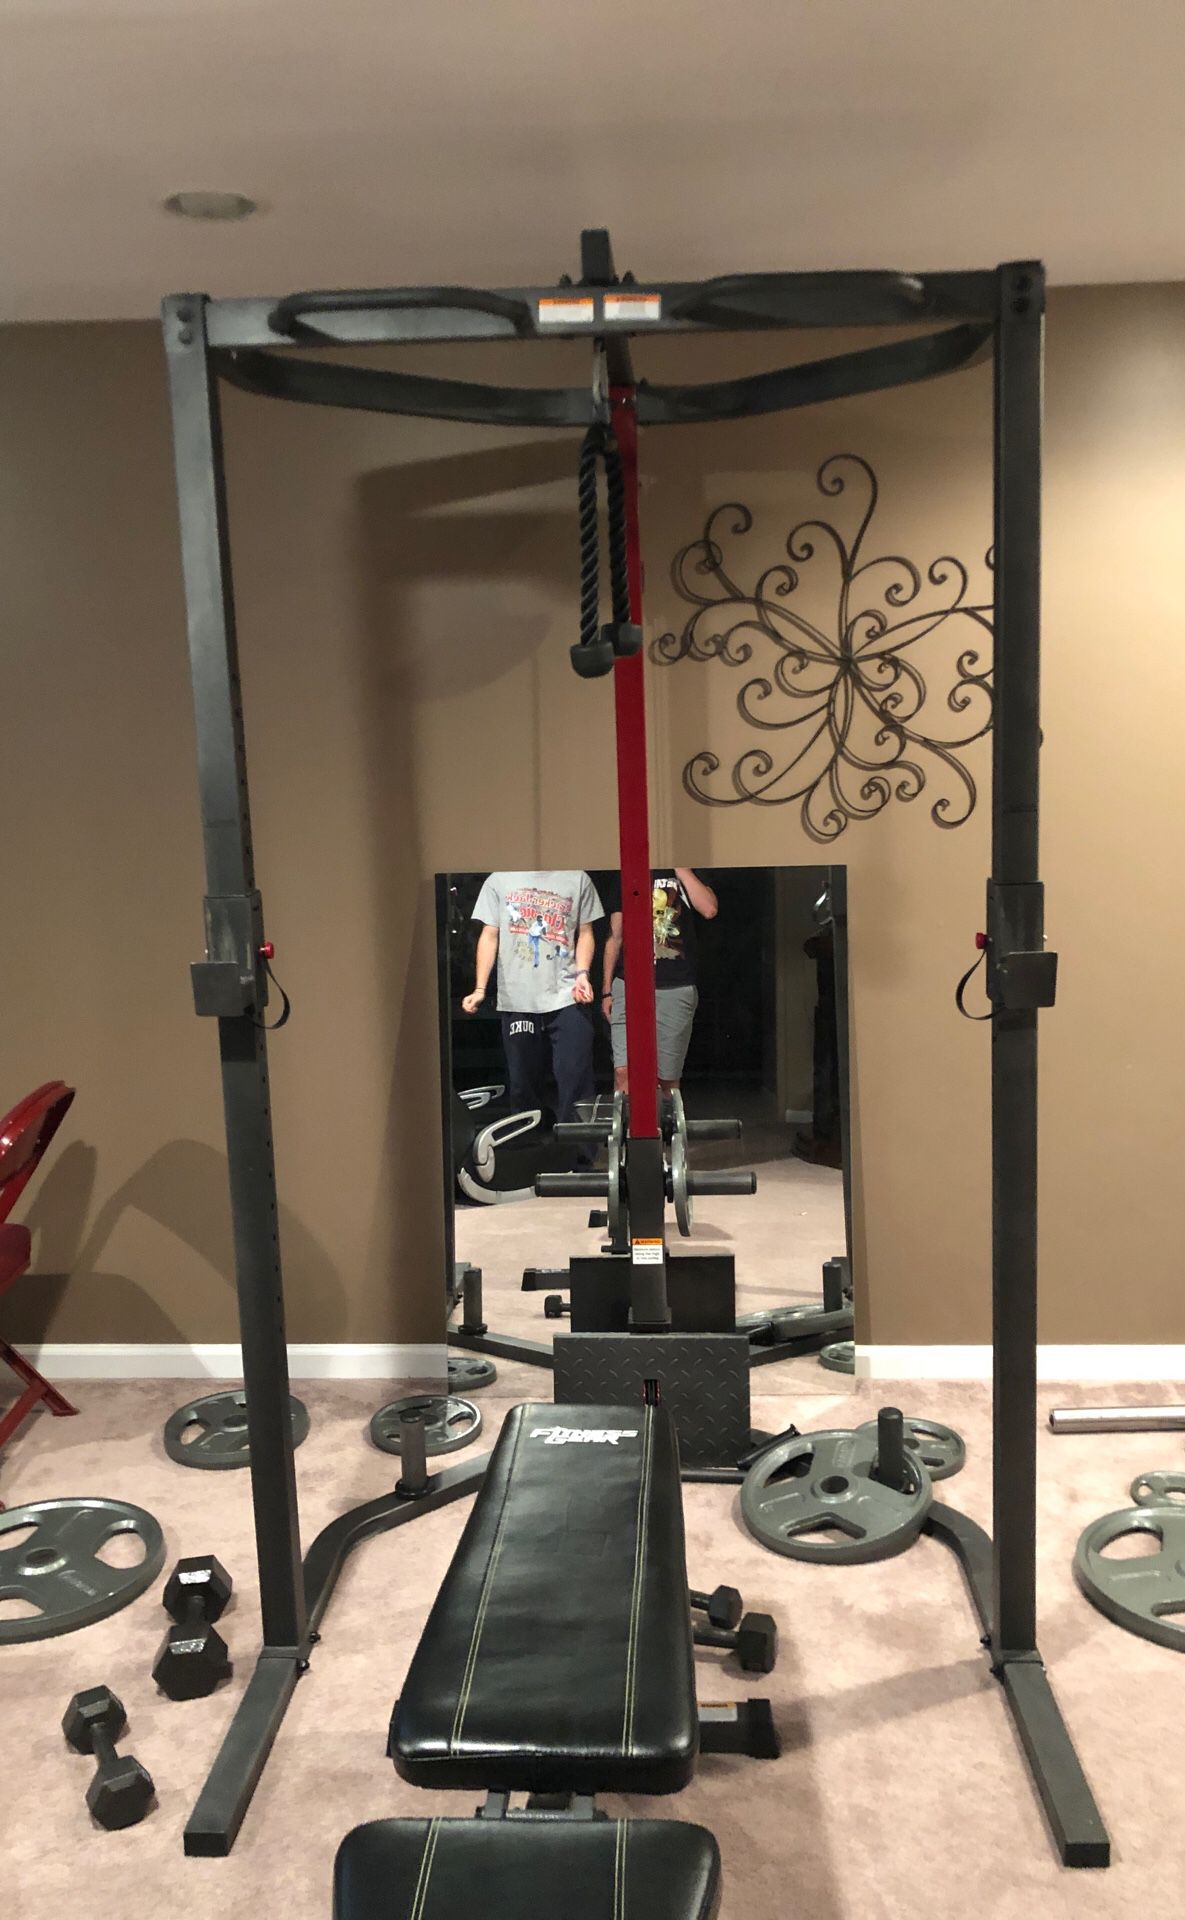 Full basement gym set, free weights and bar weights up to 45 pounds.